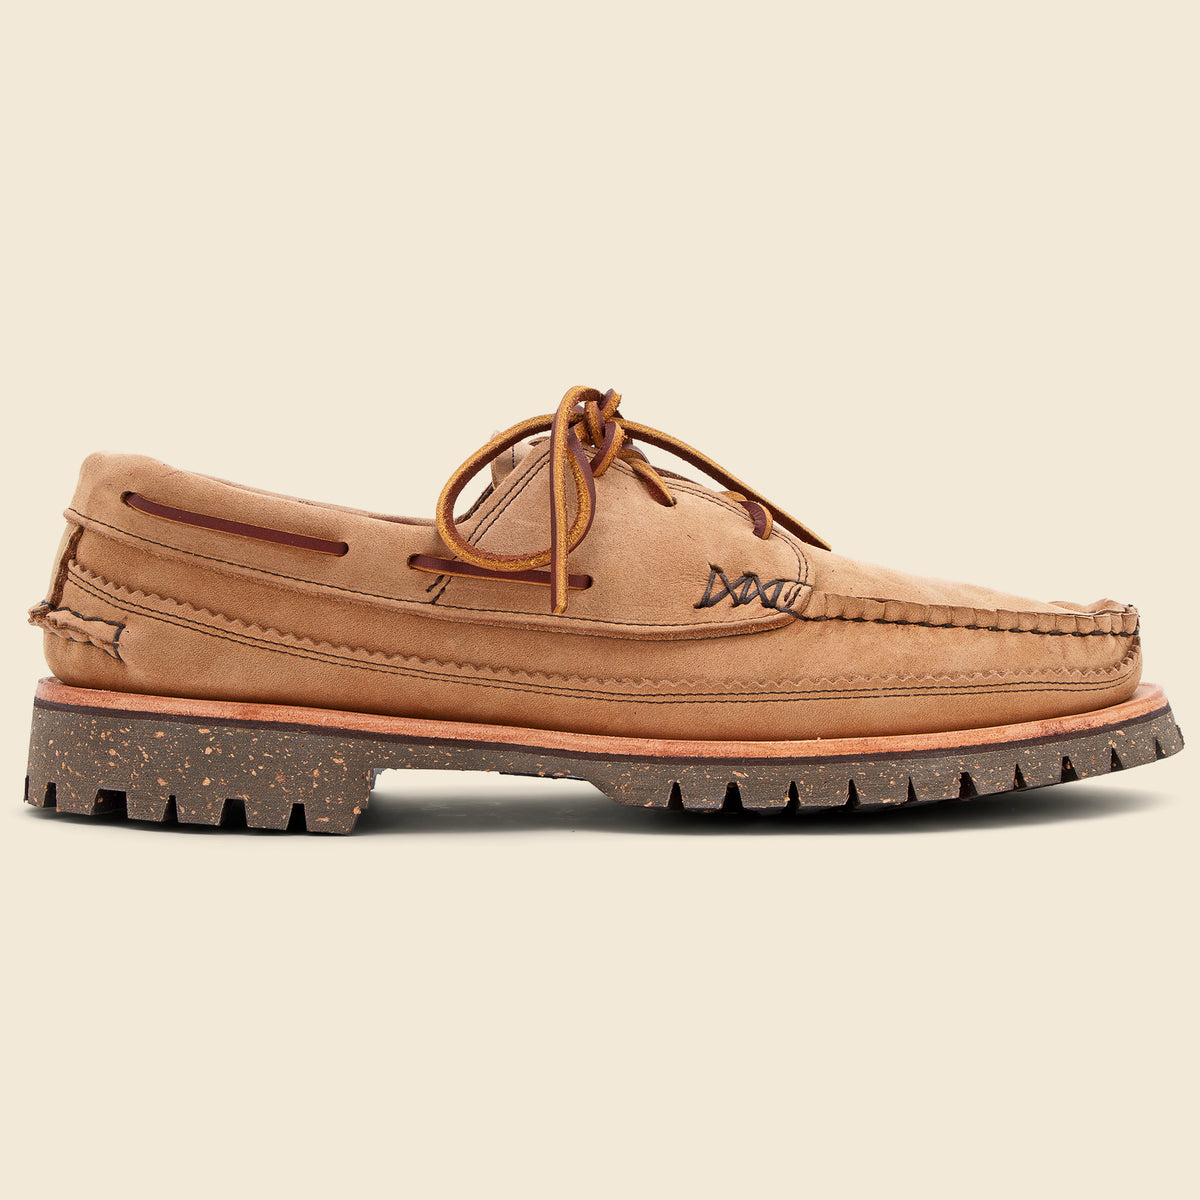 Boat Shoes Are Back. Here are some of The Best.